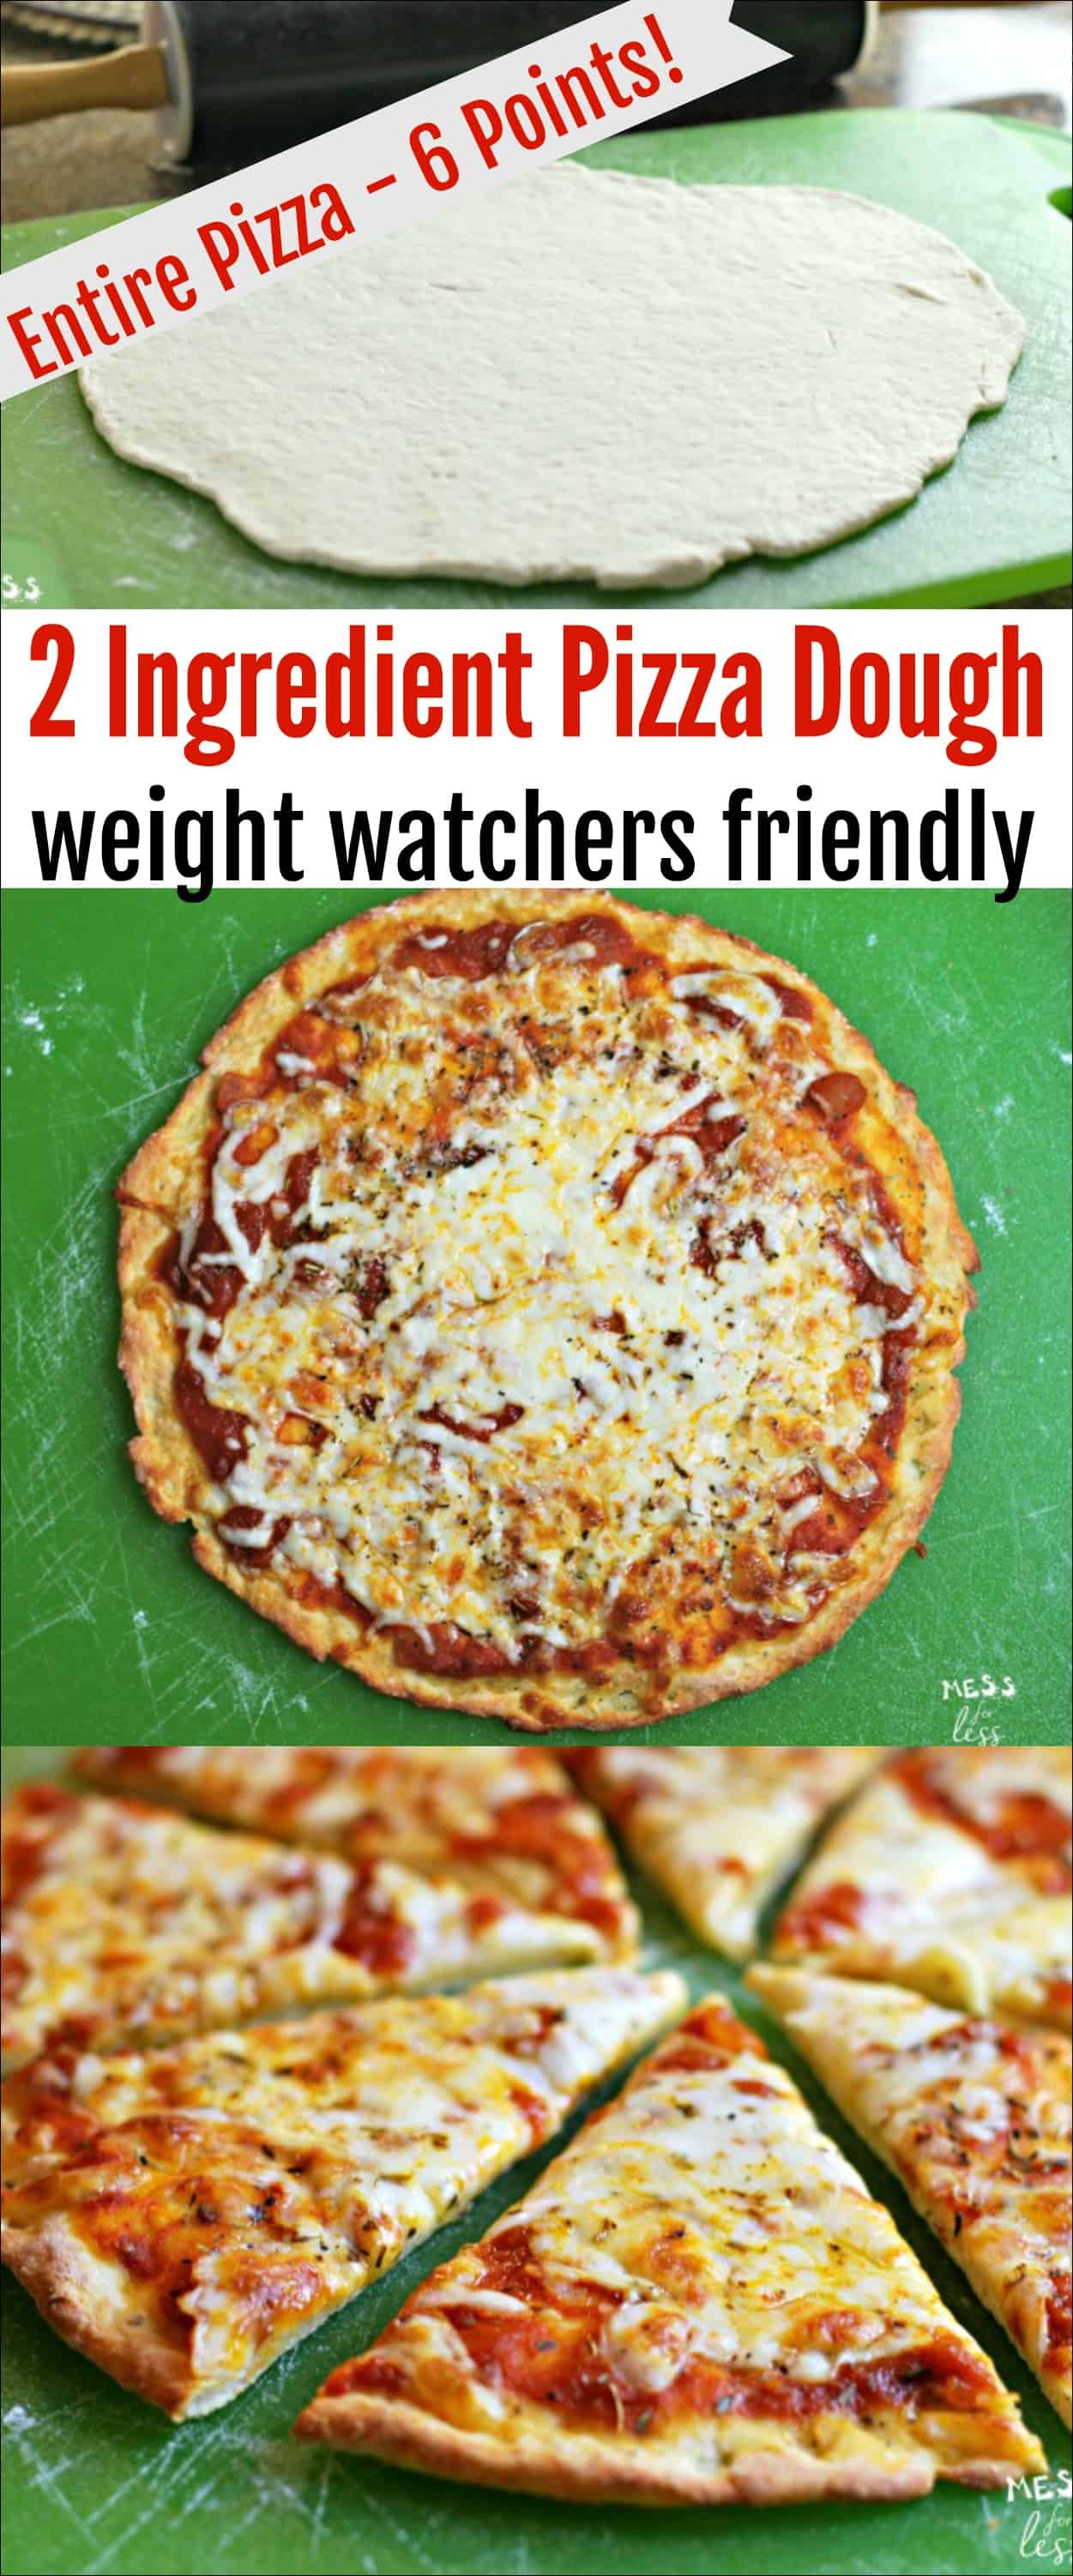 Find out how to make this Weight Watchers friendly 2 Ingredient Pizza Dough. You can have an entire pizza (with toppings) for 6 Freestyle Points! It tastes amazing and you won't feel deprived at all!